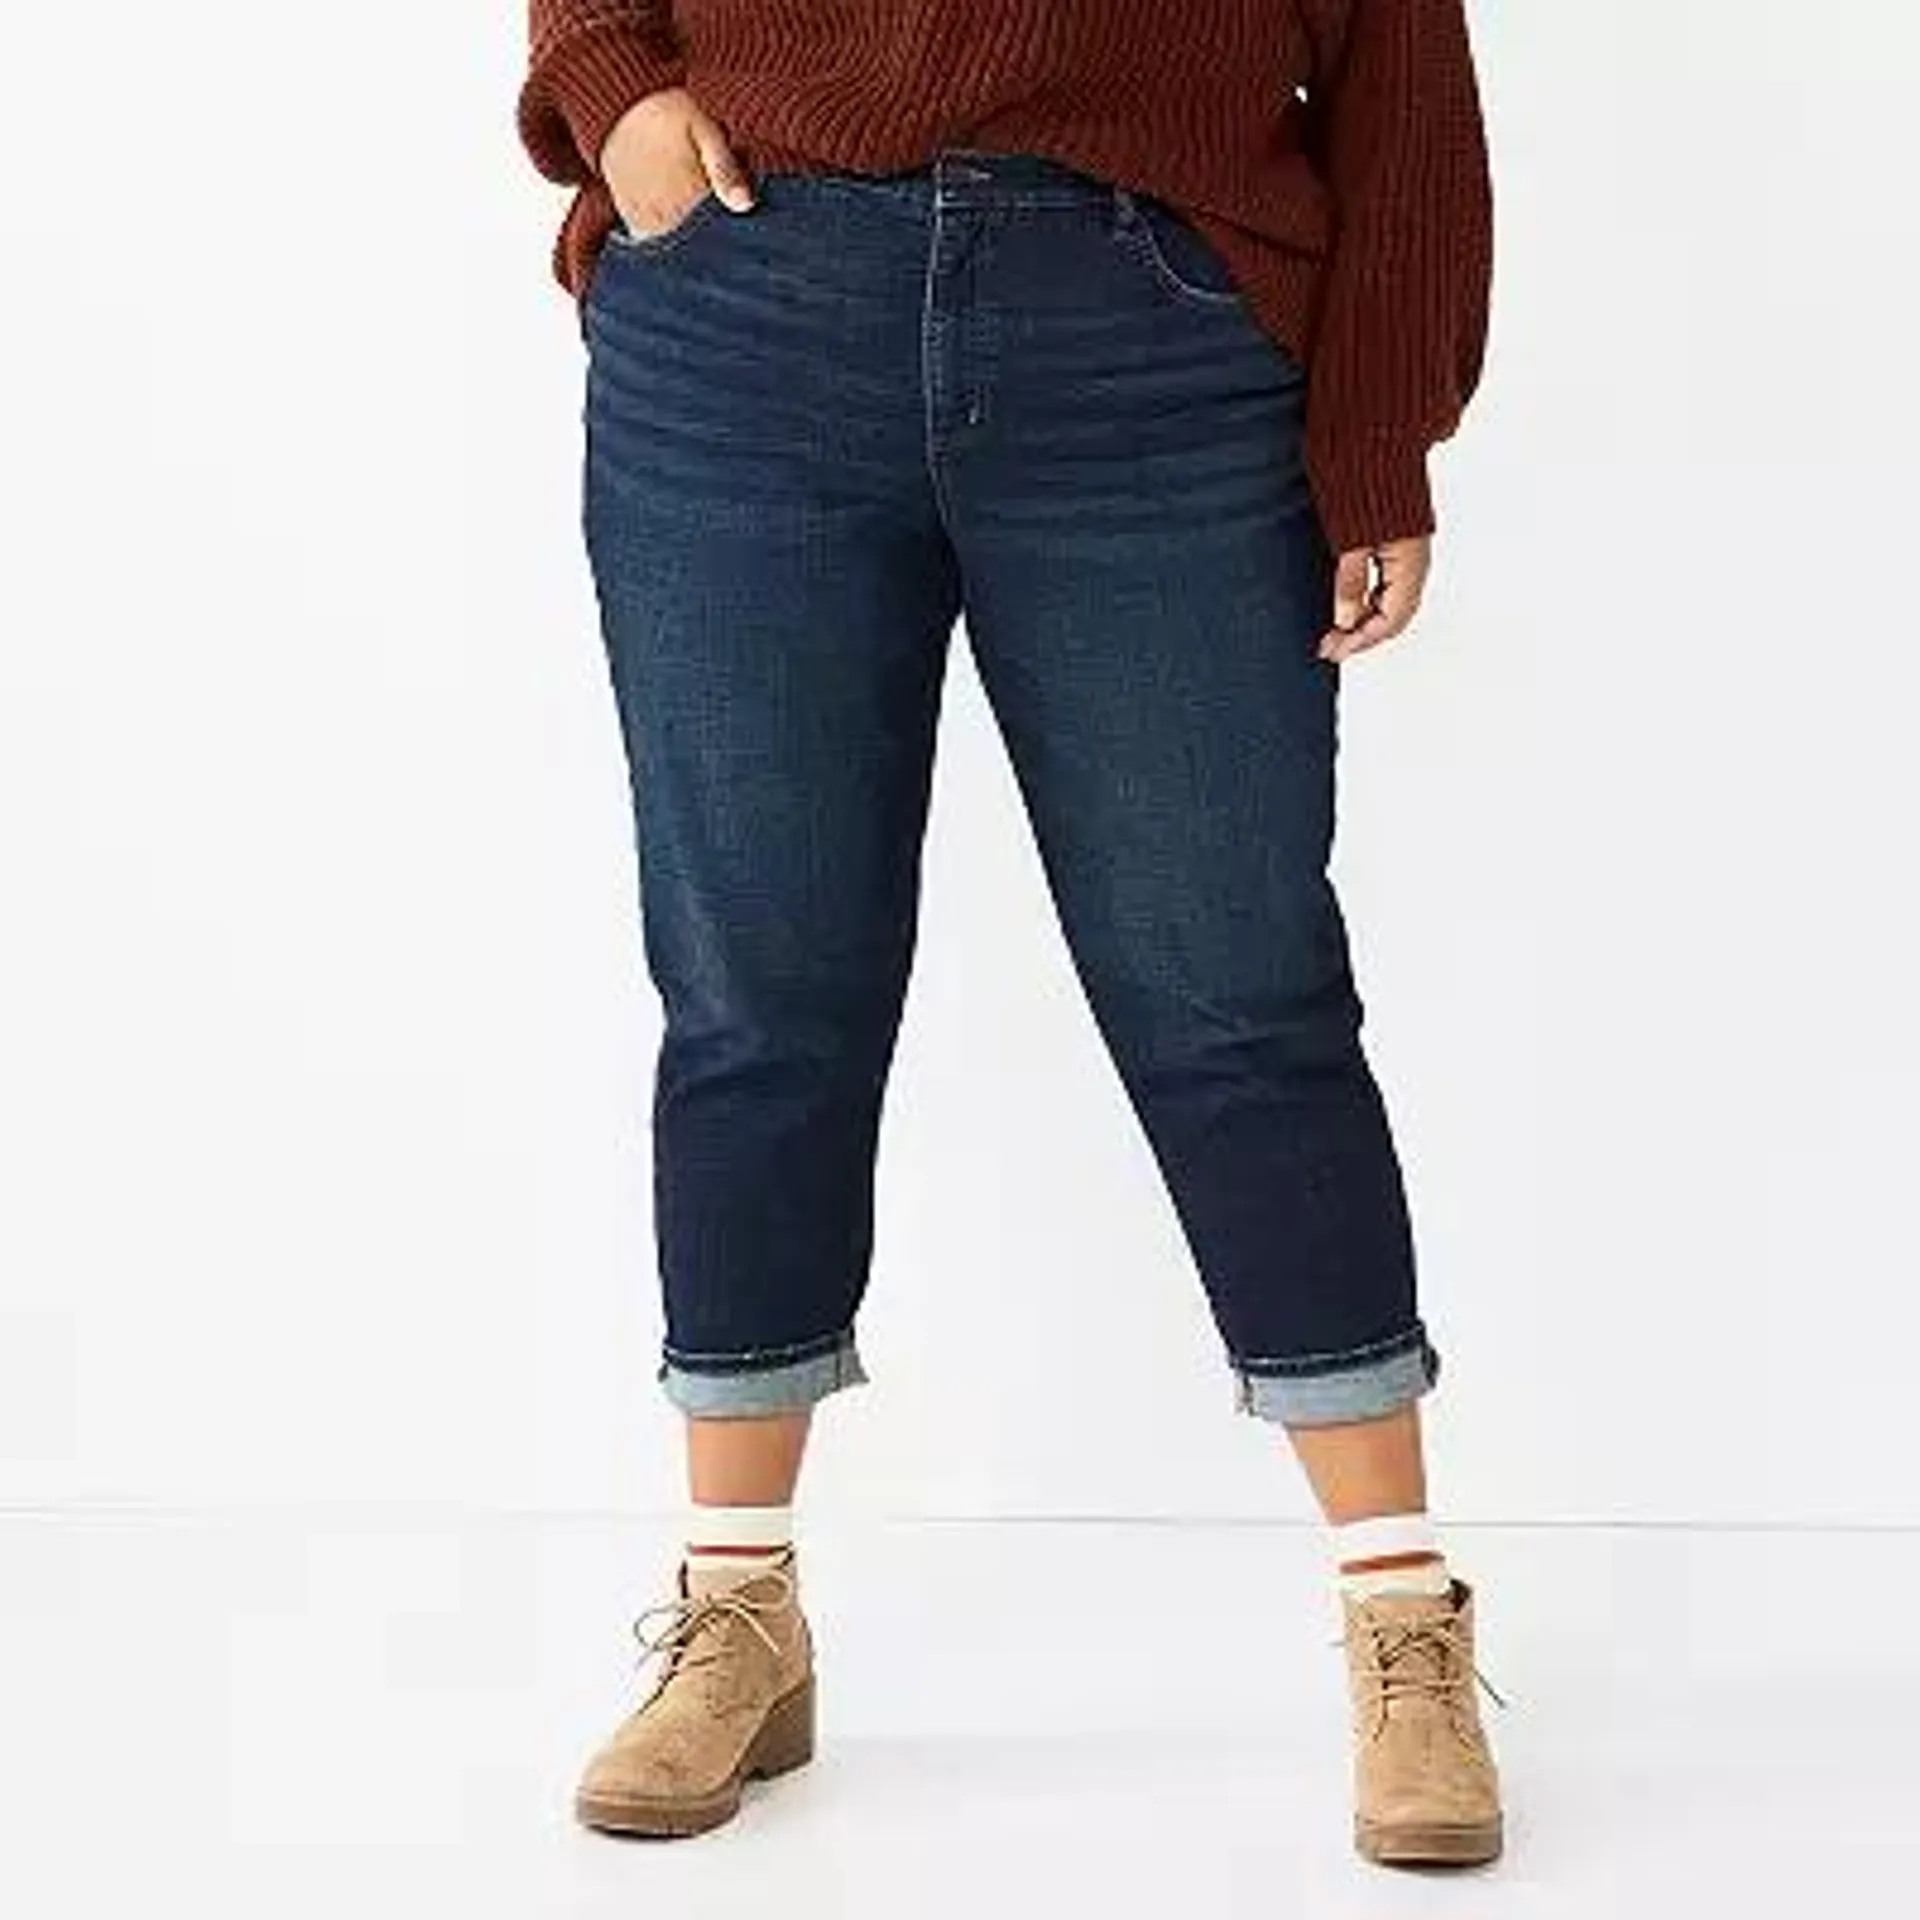 Plus Size Sonoma Goods For Life® High-Waisted Boyfriend Jeans